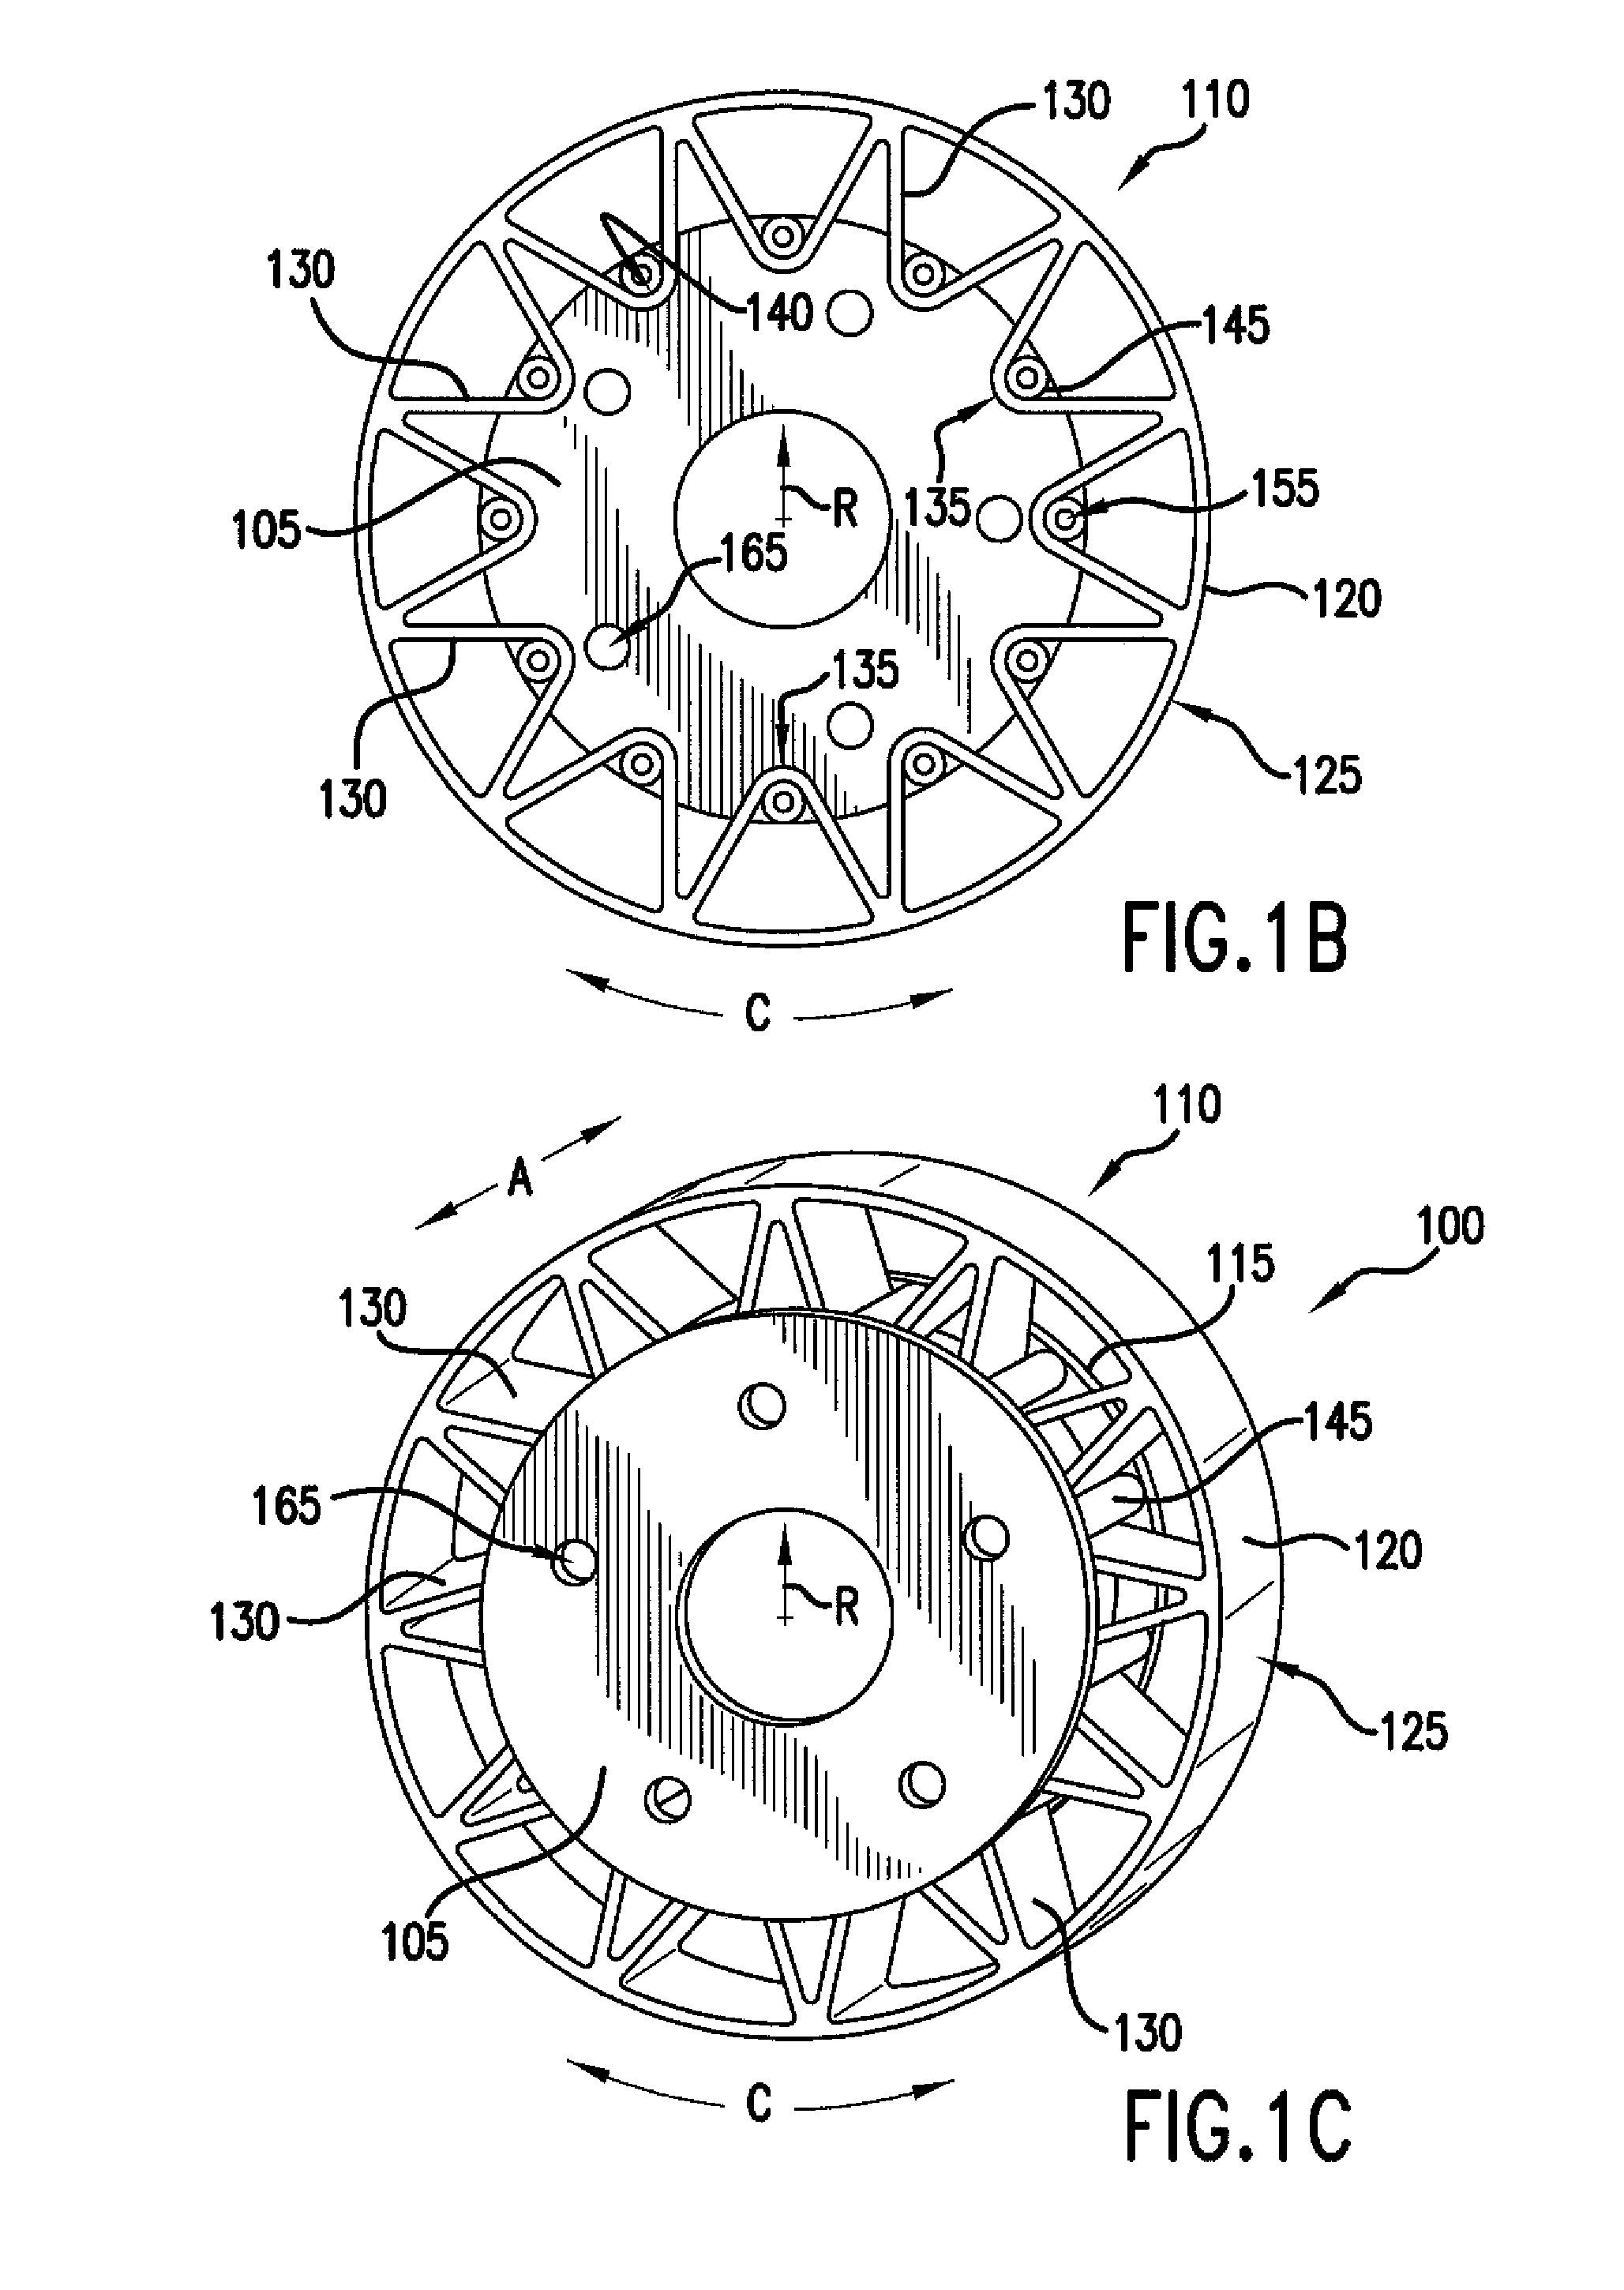 Non-pneumatic wheel assembly with removable hub